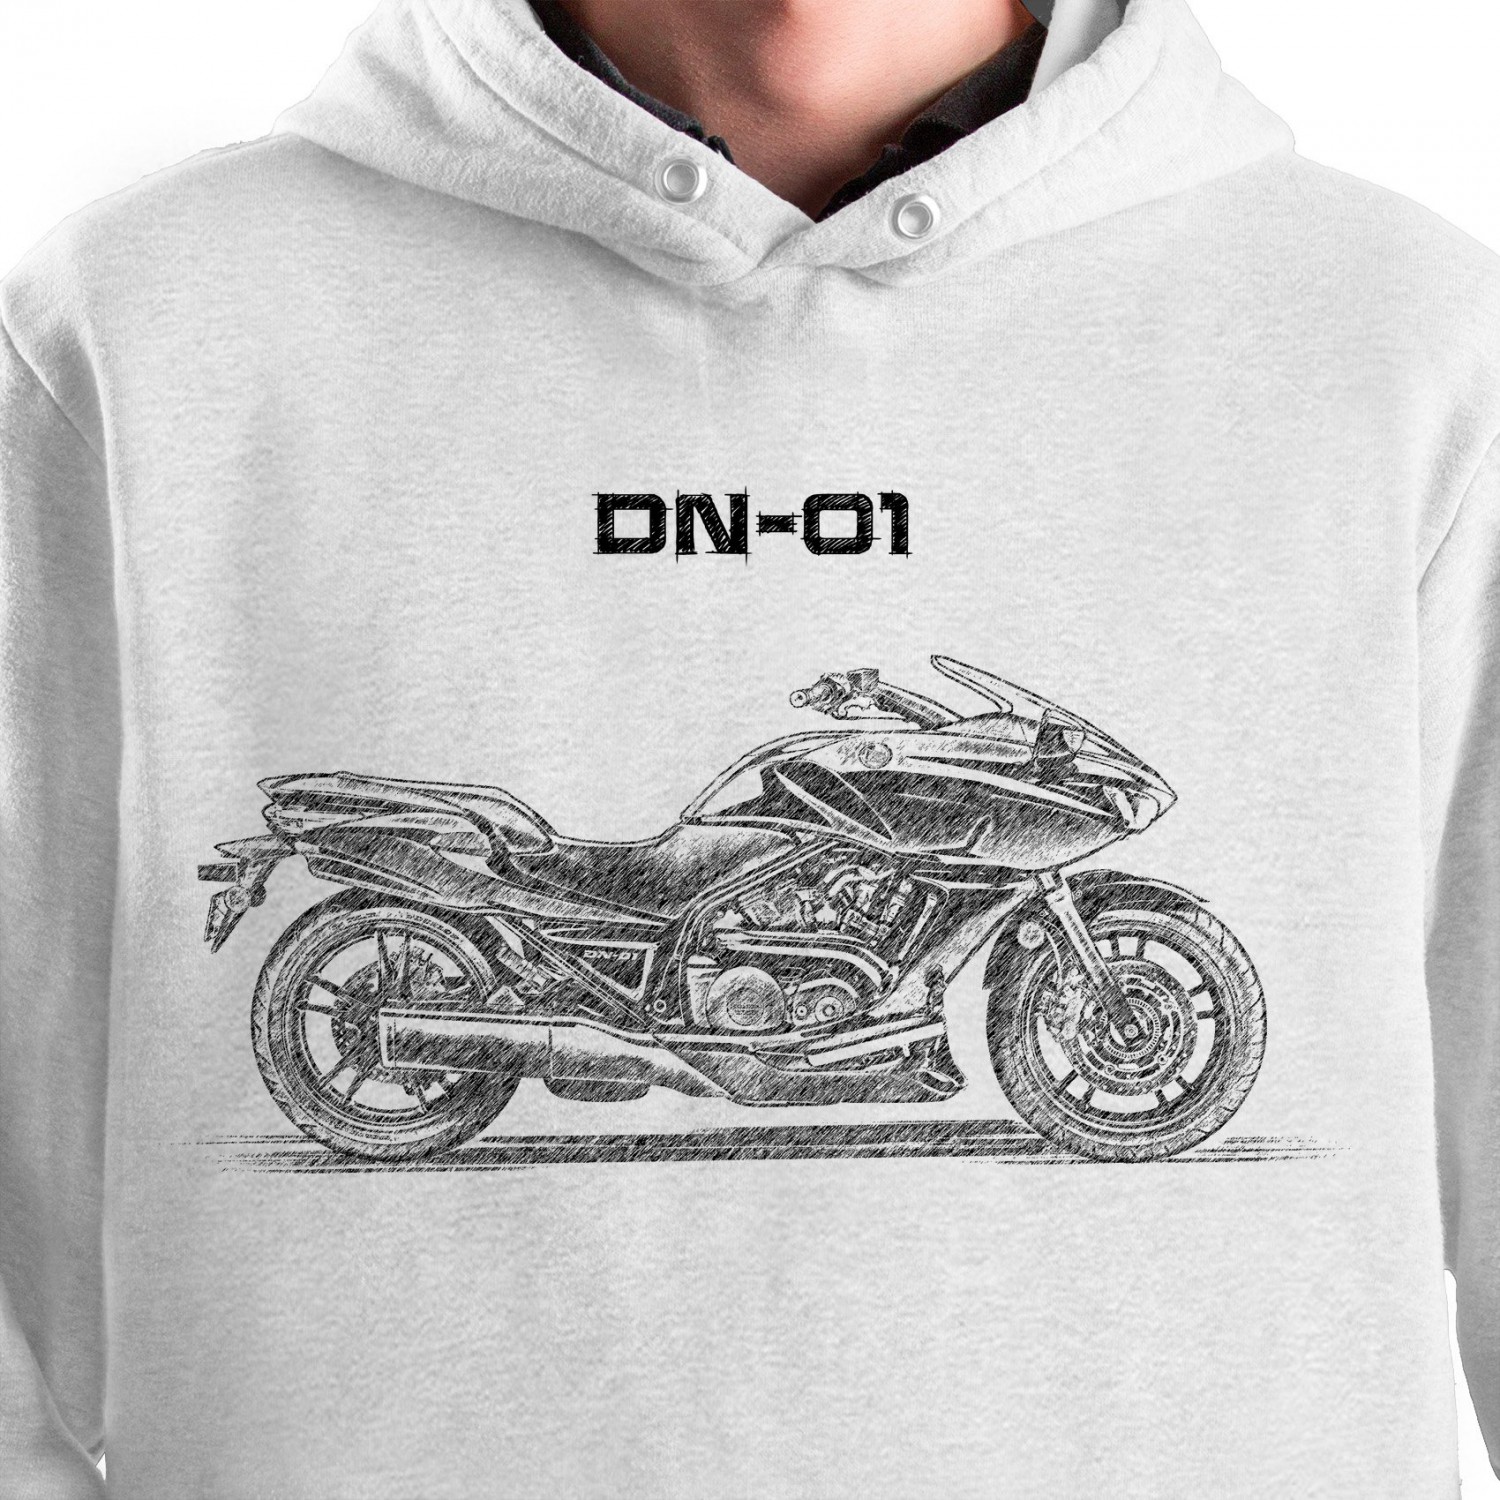 White T-shirt with Honda DN-01. Gift for motorcyclist.